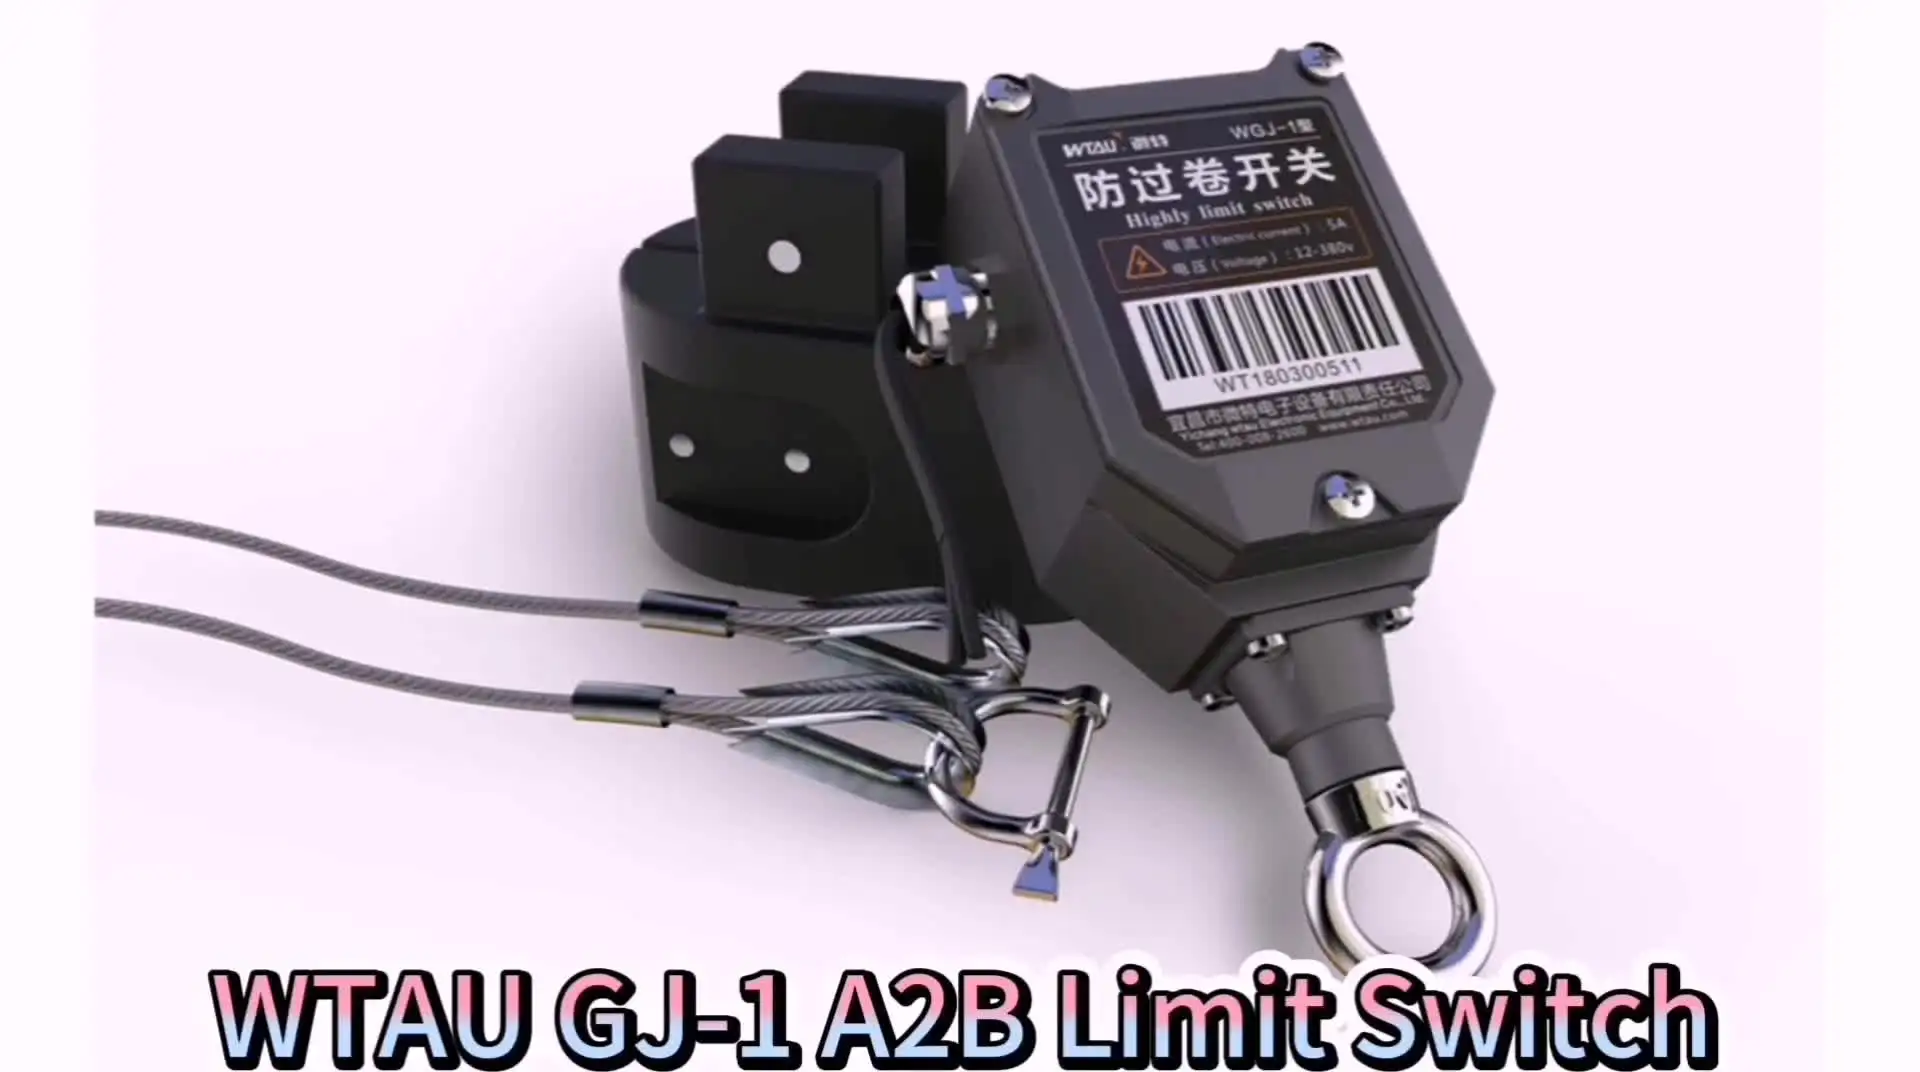 

Anti Two Block Limit switch for crawler crane overload protection